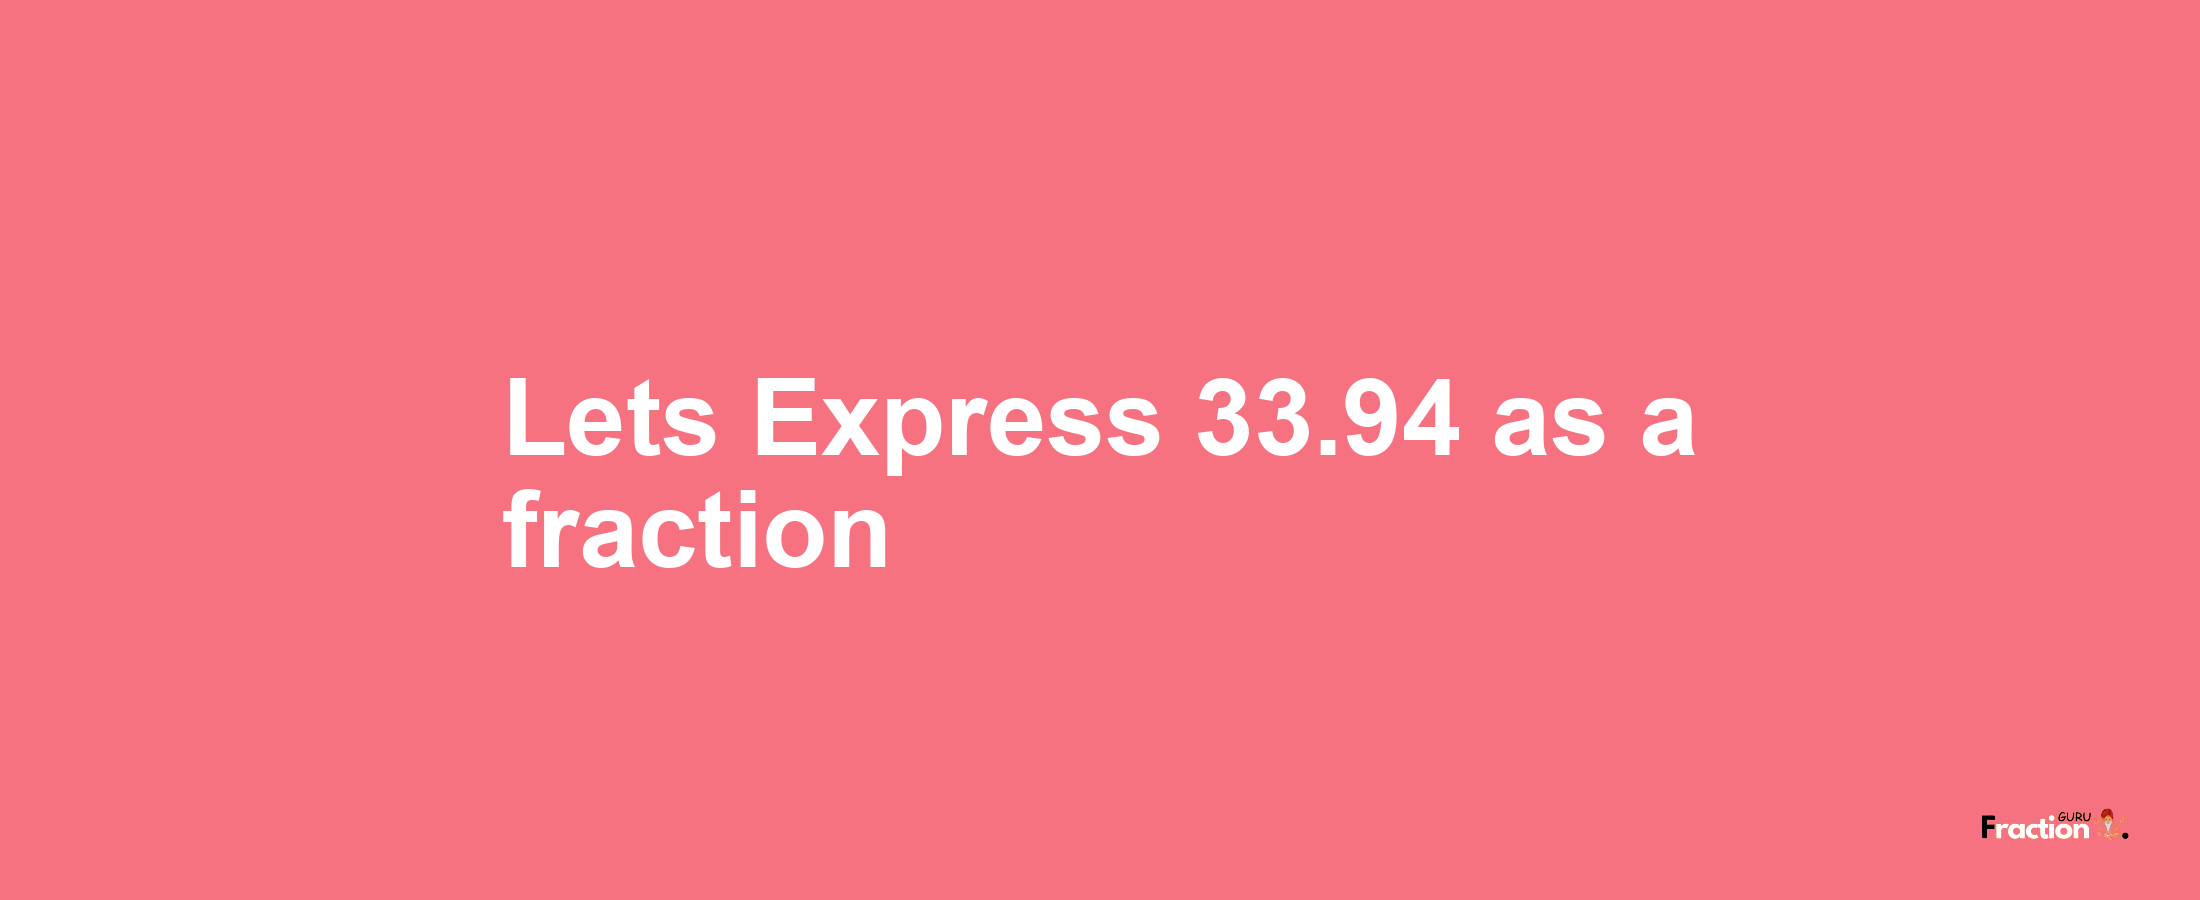 Lets Express 33.94 as afraction